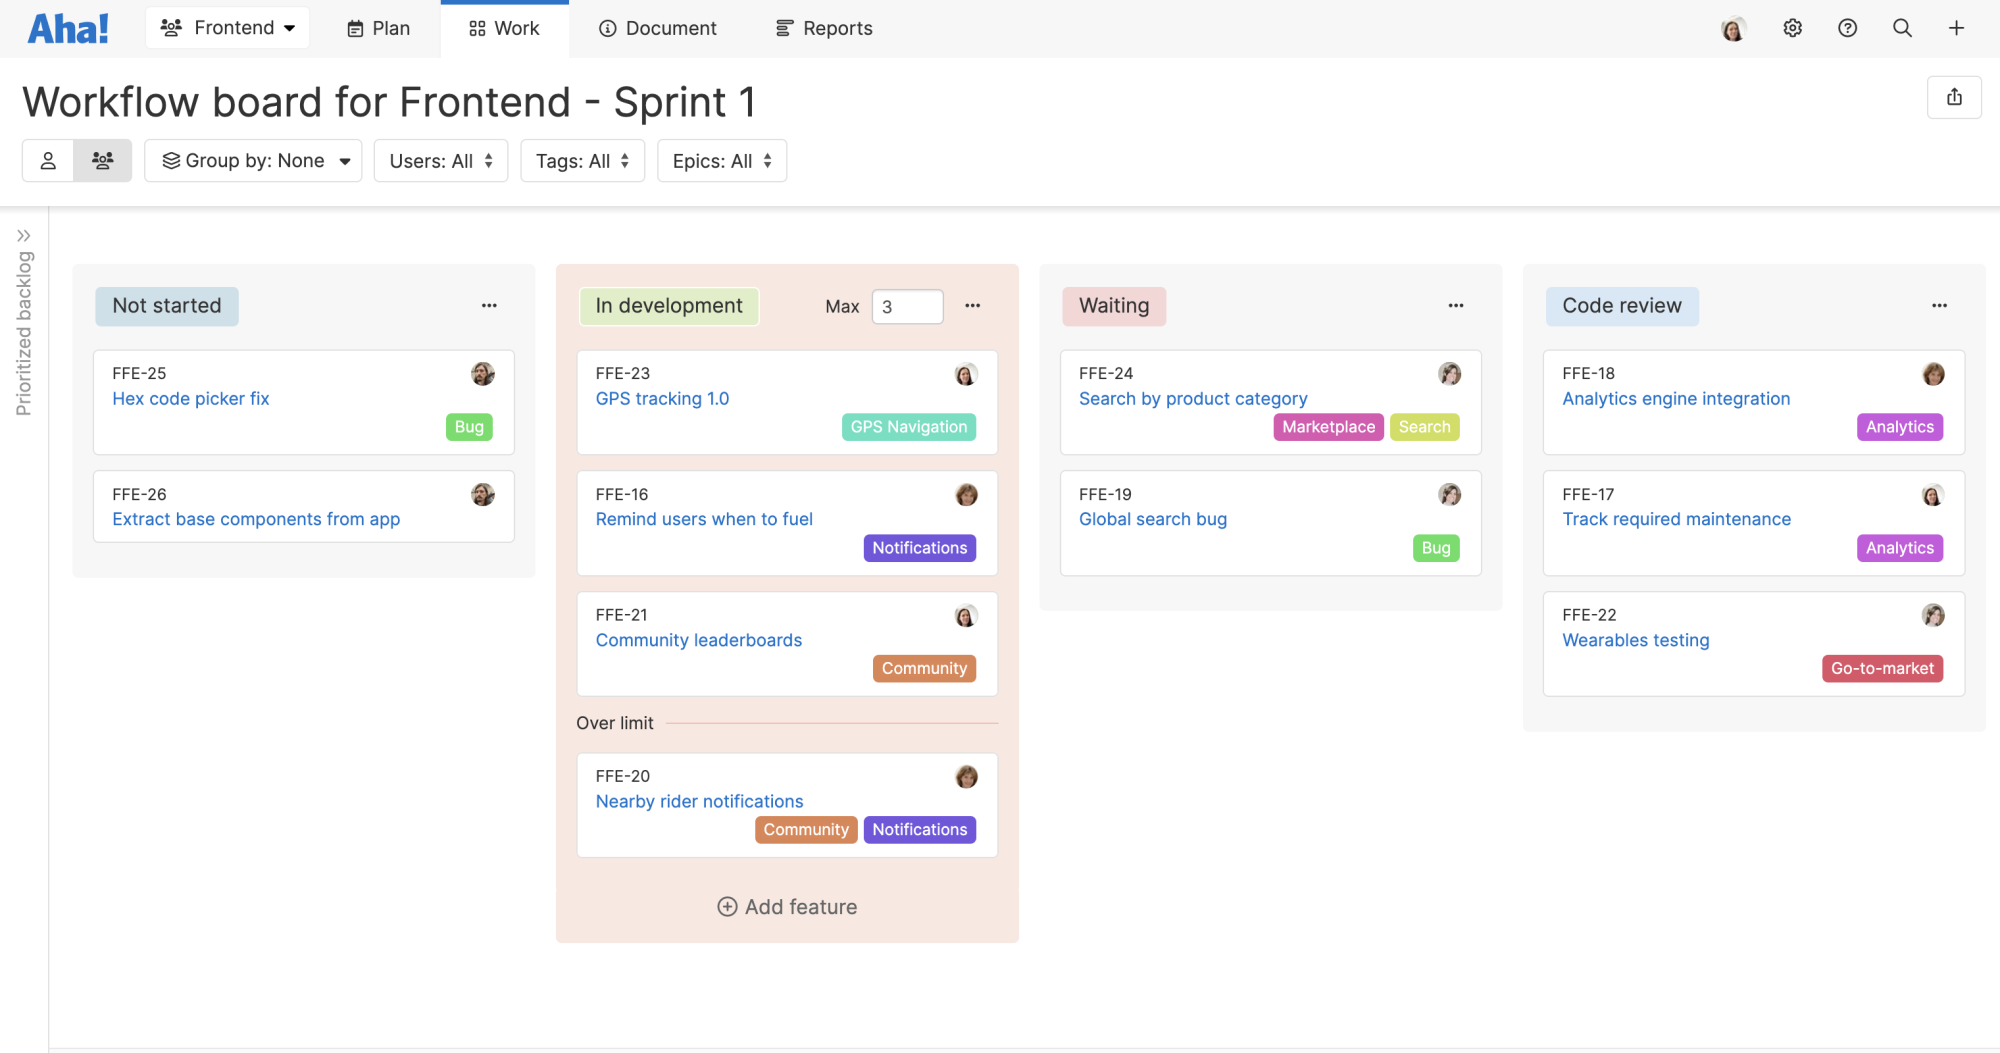 View weekly performance across the entire team or filter by individual team members.